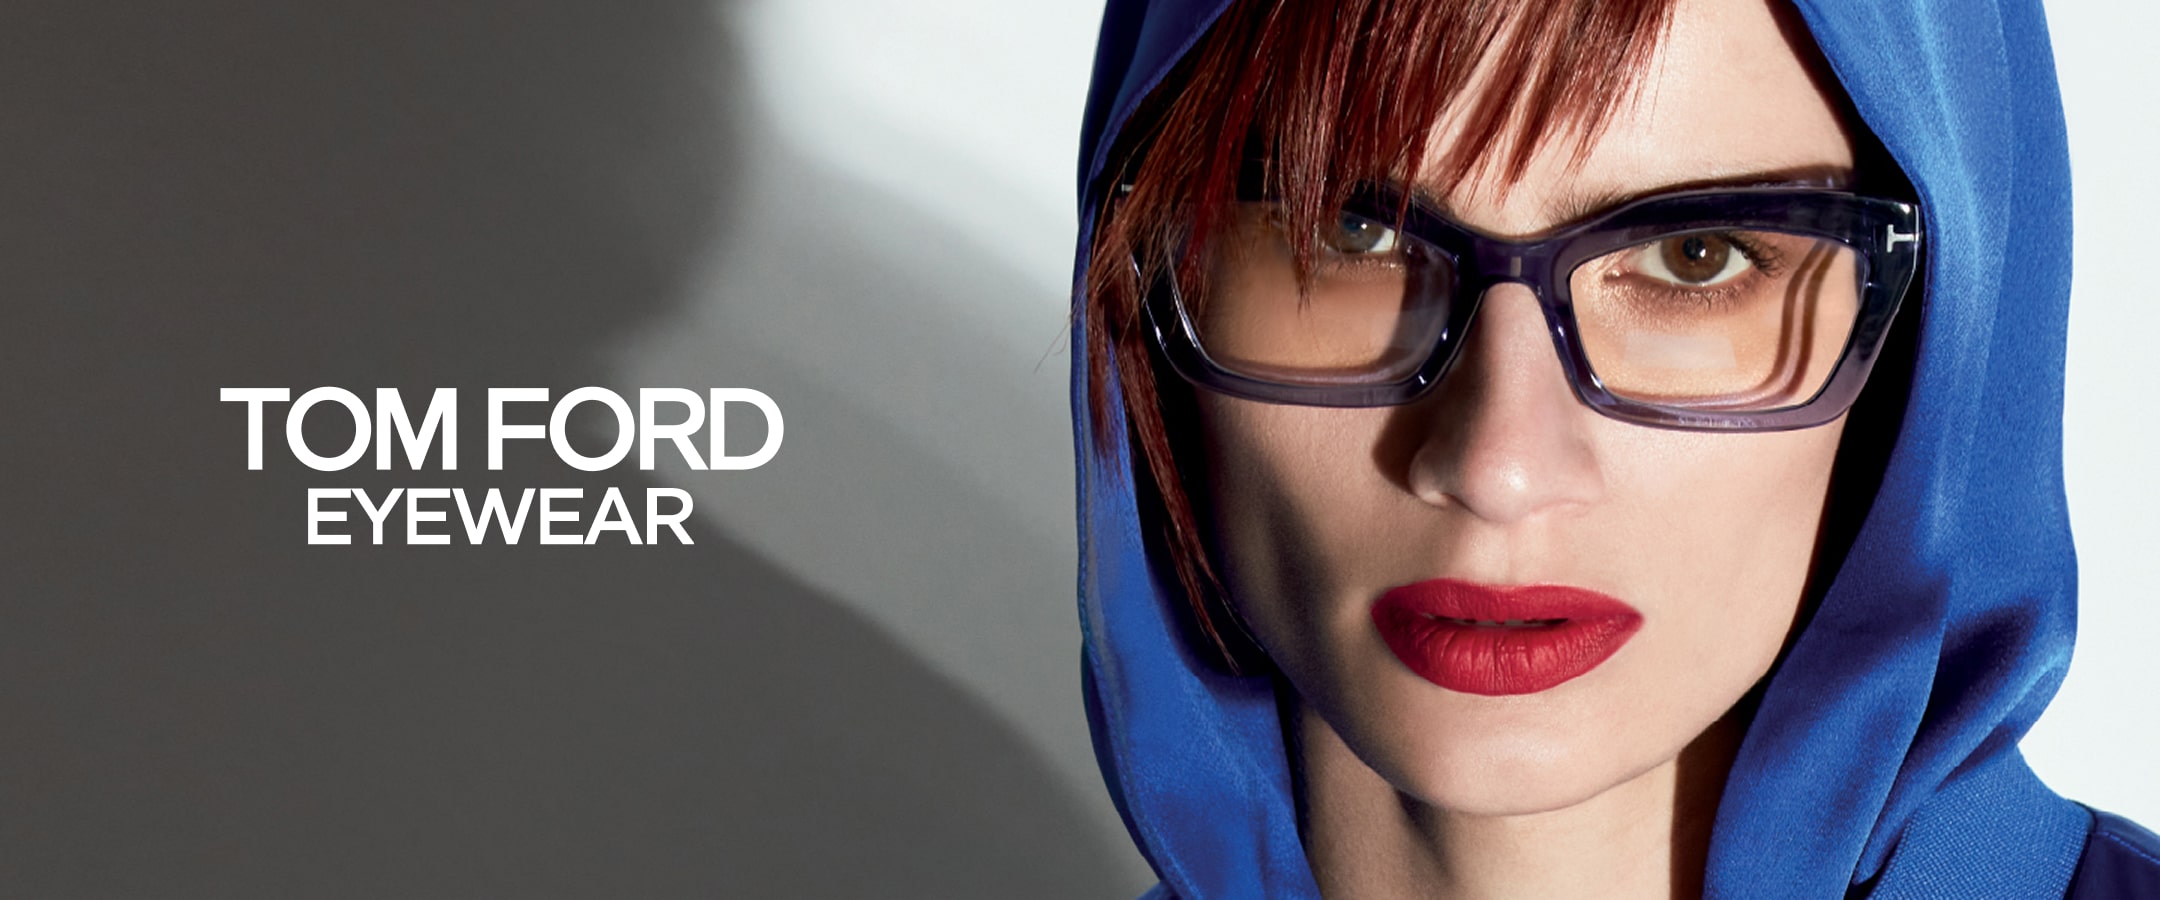 Tom Ford 2 Collection Image